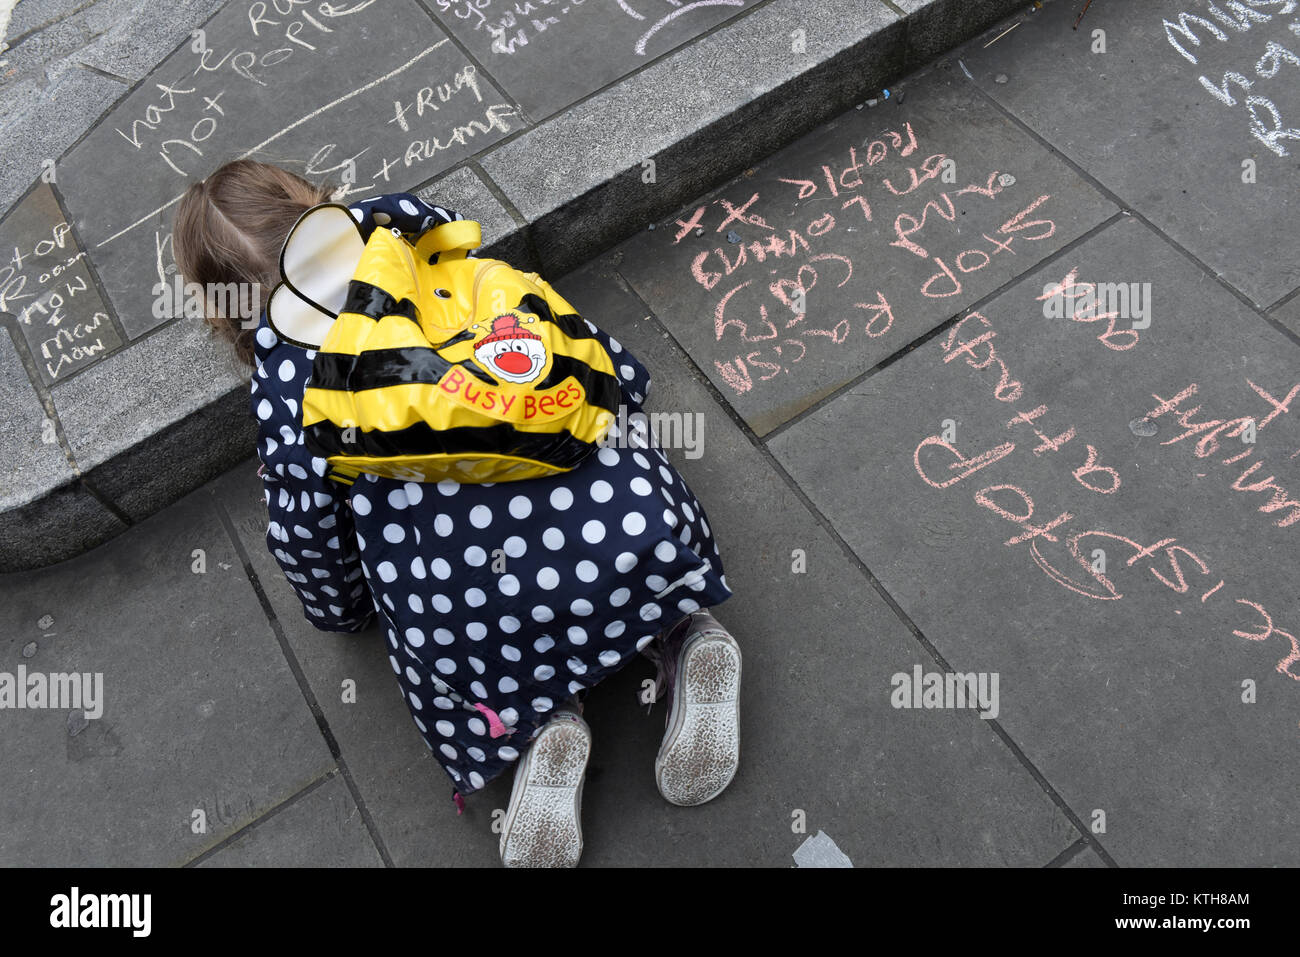 A child protester is writing anti-Trump and anti-racism messages on the pavement during the UN Anti-Racism Day in London, UK. Stock Photo